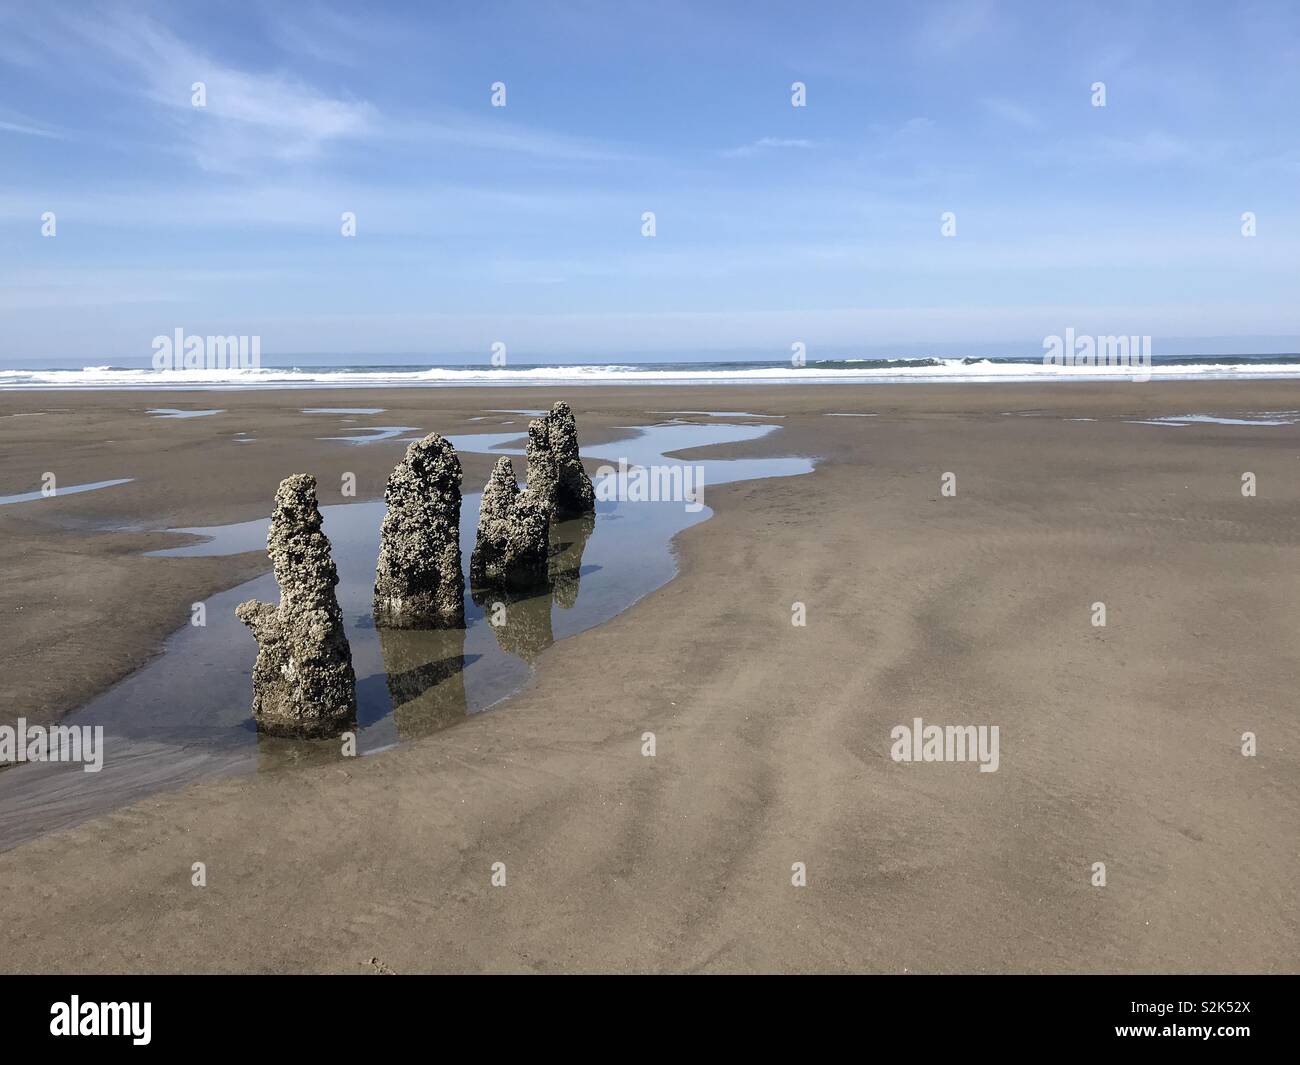 Ghost Forest at Neskowin Beach, Oregon. Remnants of an ancient Sitka spruce forest. Tree stumps with barnacles. Photo Credit: Ann M. Nicgorski, 2018. Stock Photo